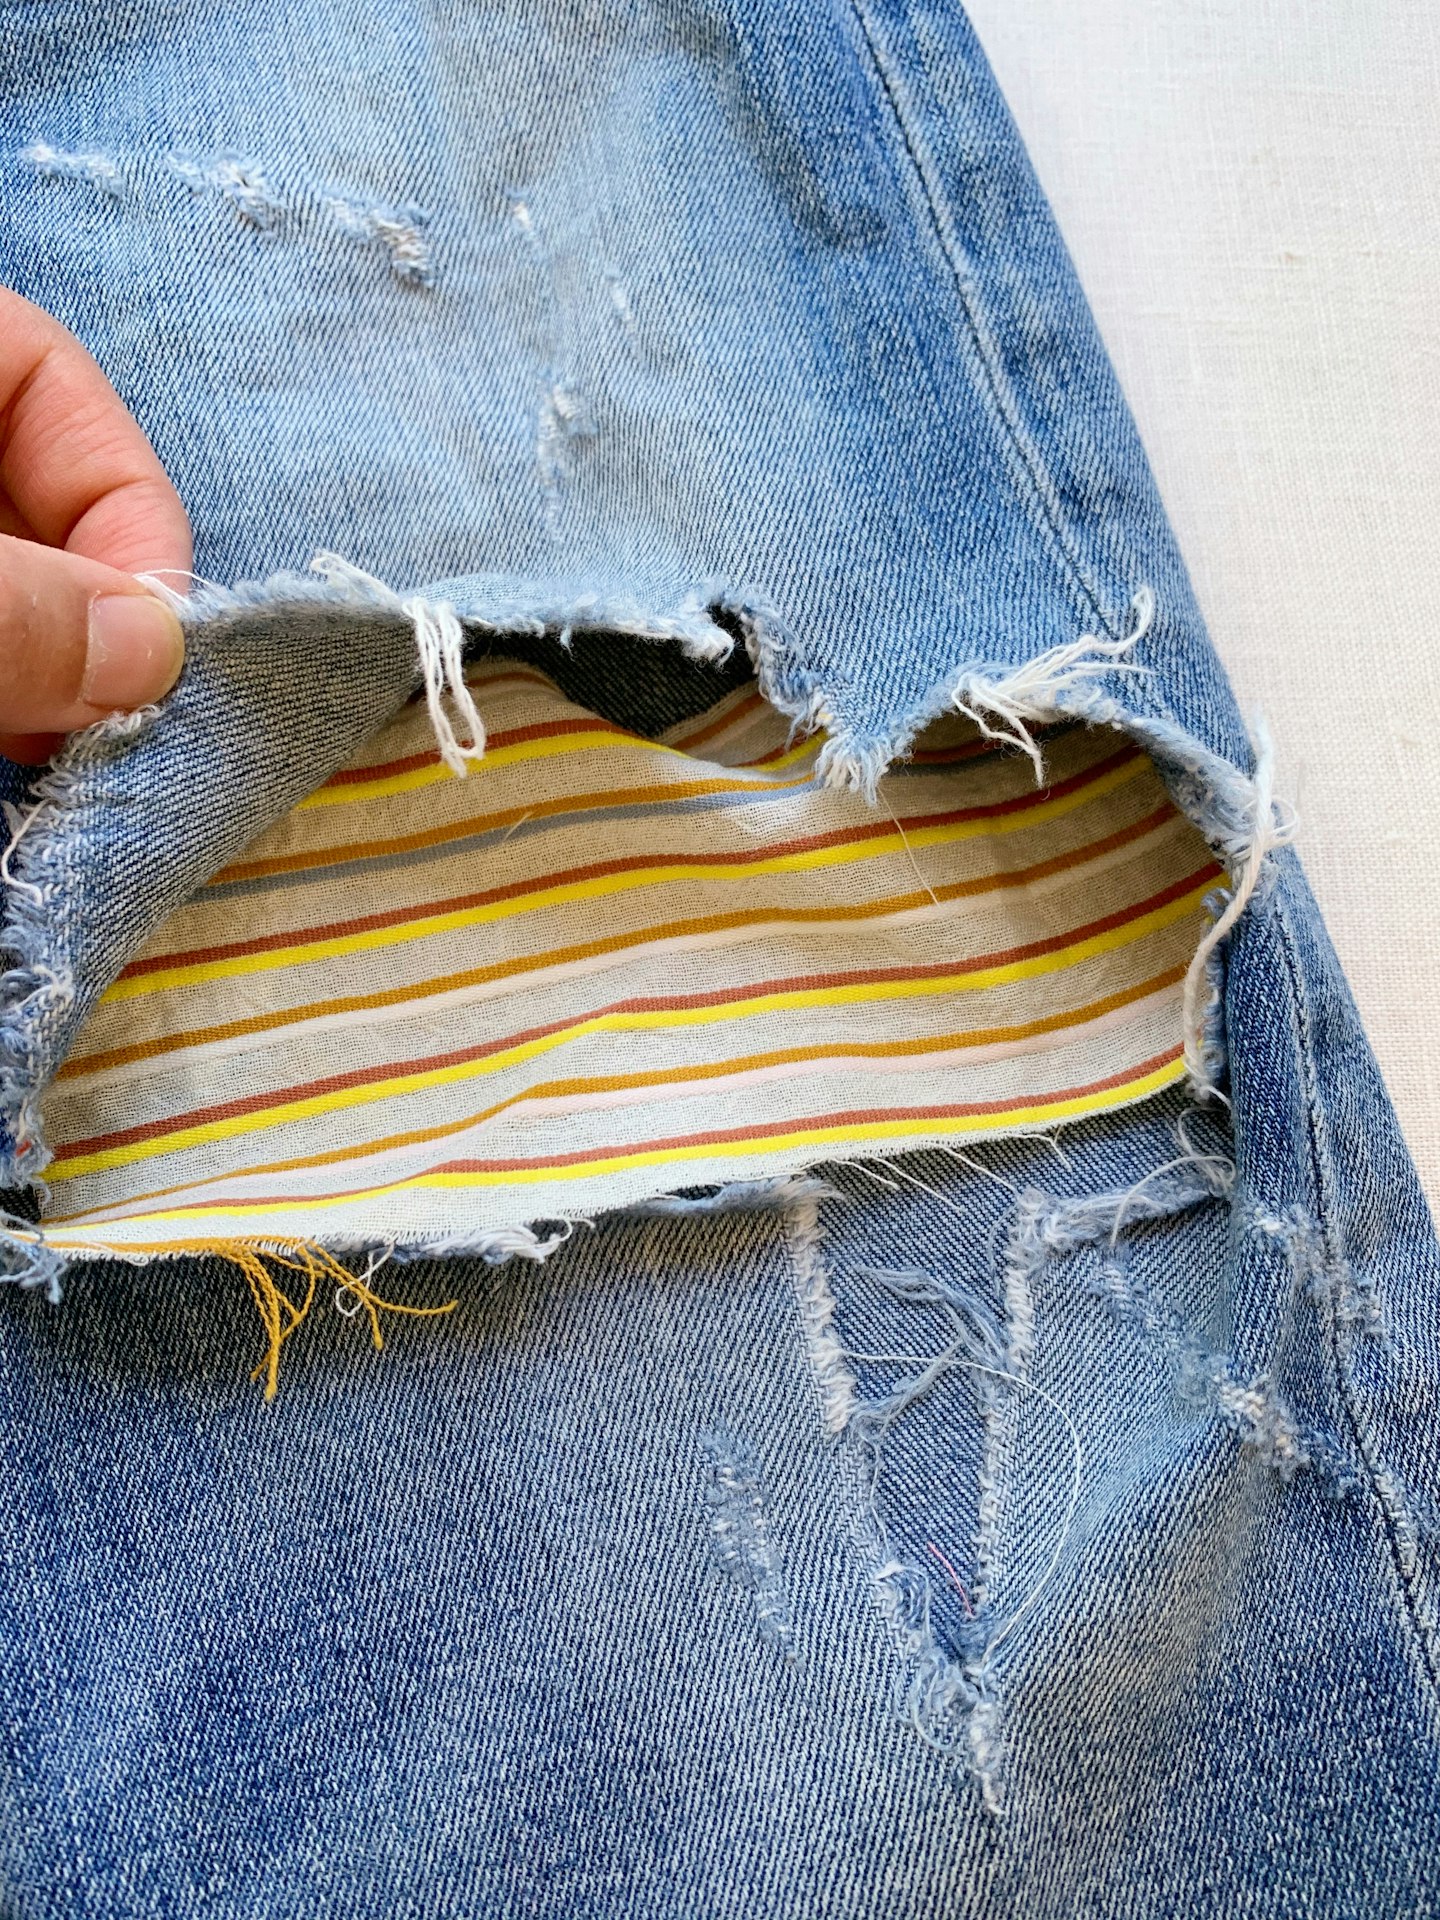 patchworking jeans